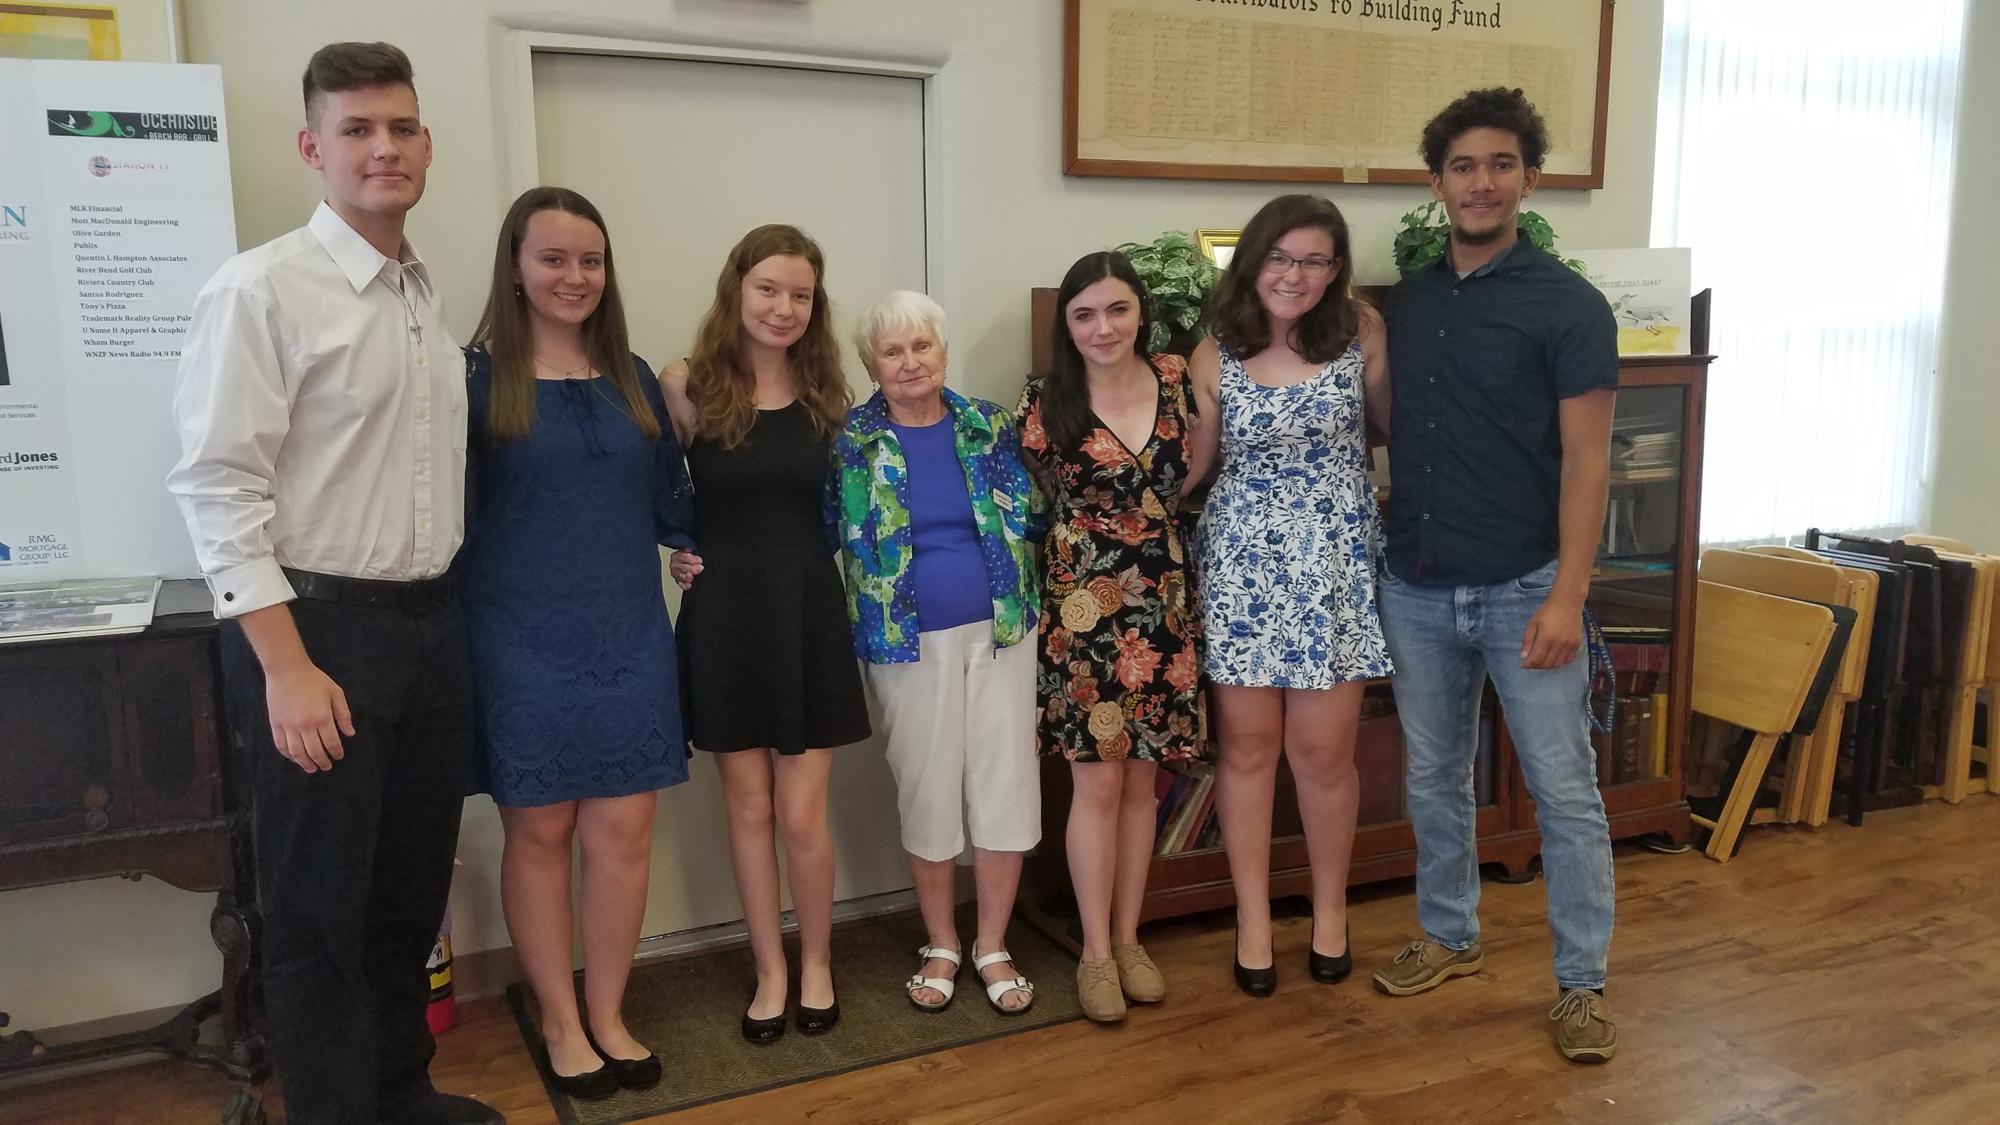 Education Committee Chair Kay Johnson with FWC scholarship recipients Matthew Mrnacaj, Allison Huggins, Allie Marino, Isabella Scarcella (HOBY recipient), Margaret O'Mahoney and Jackson Courson. Courtesy photo of Patricia Hale